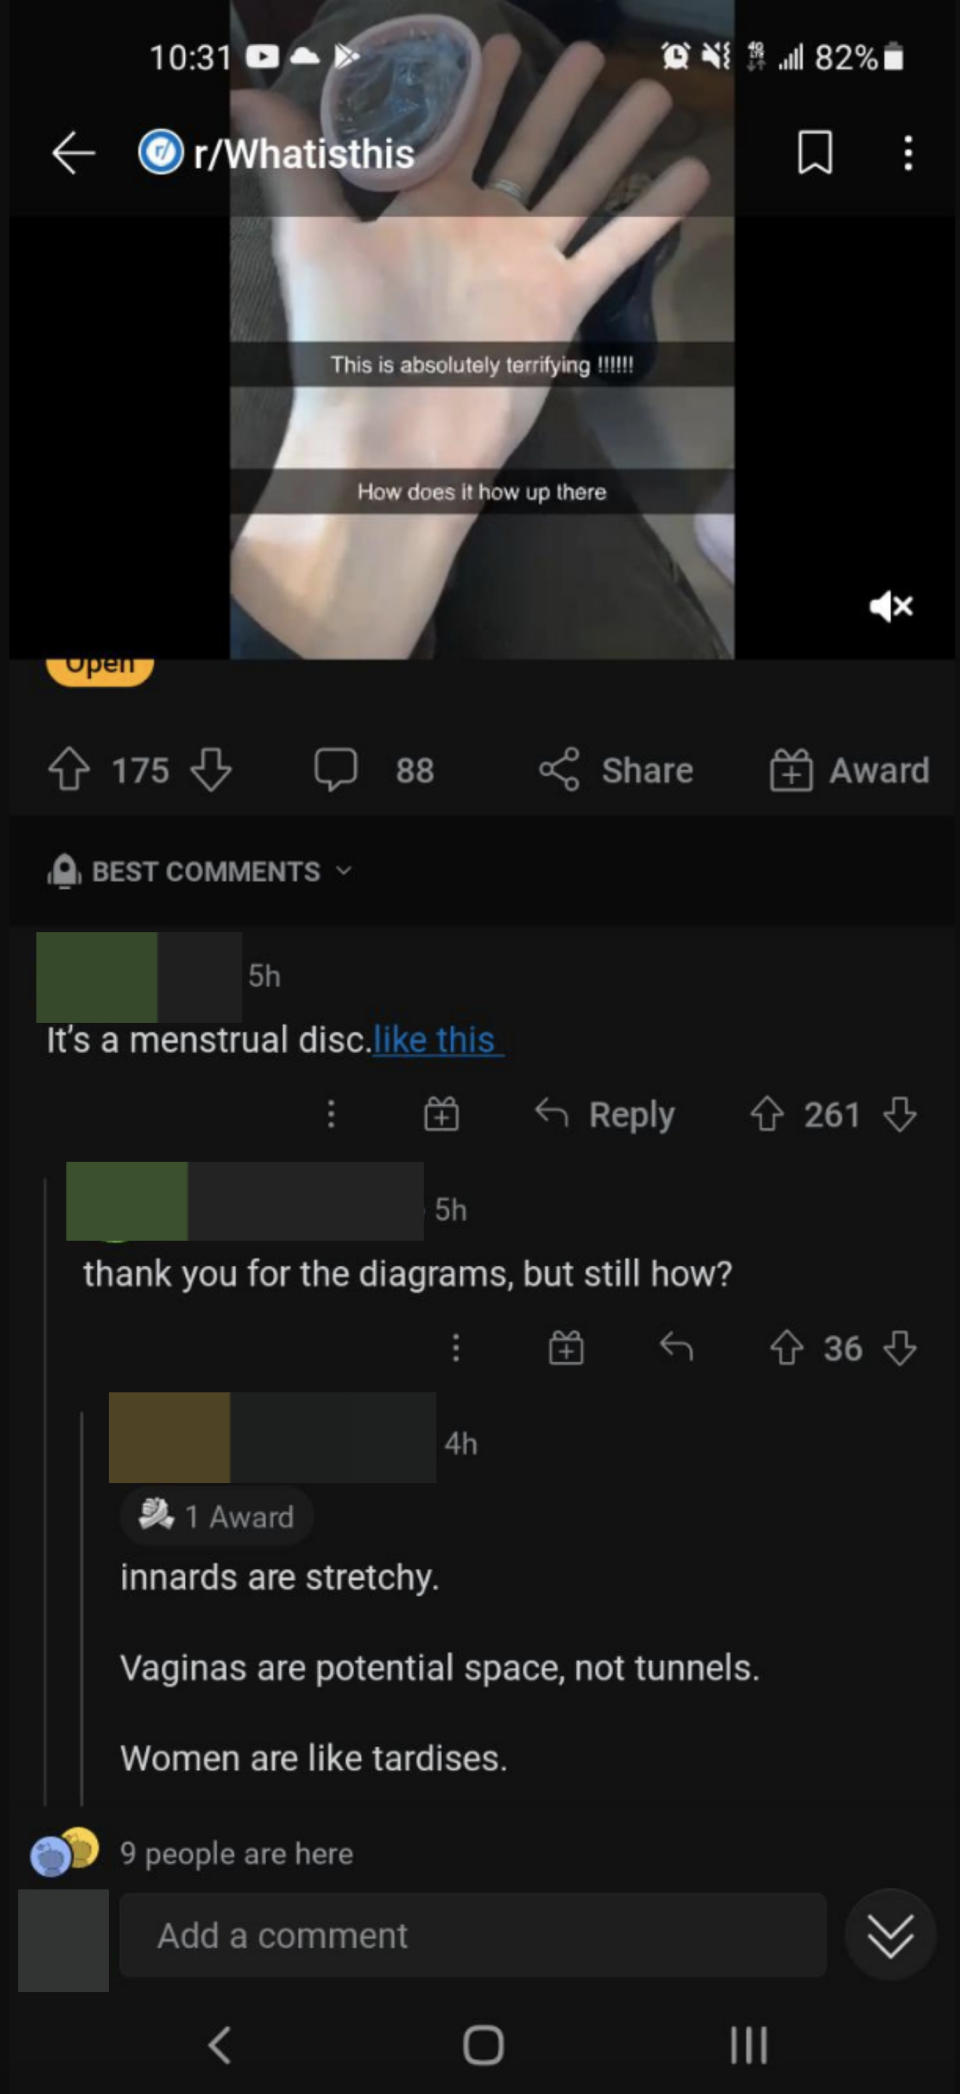 "vaginas are potential space not tunnels" in response to a photo asking what the menstrual disc was